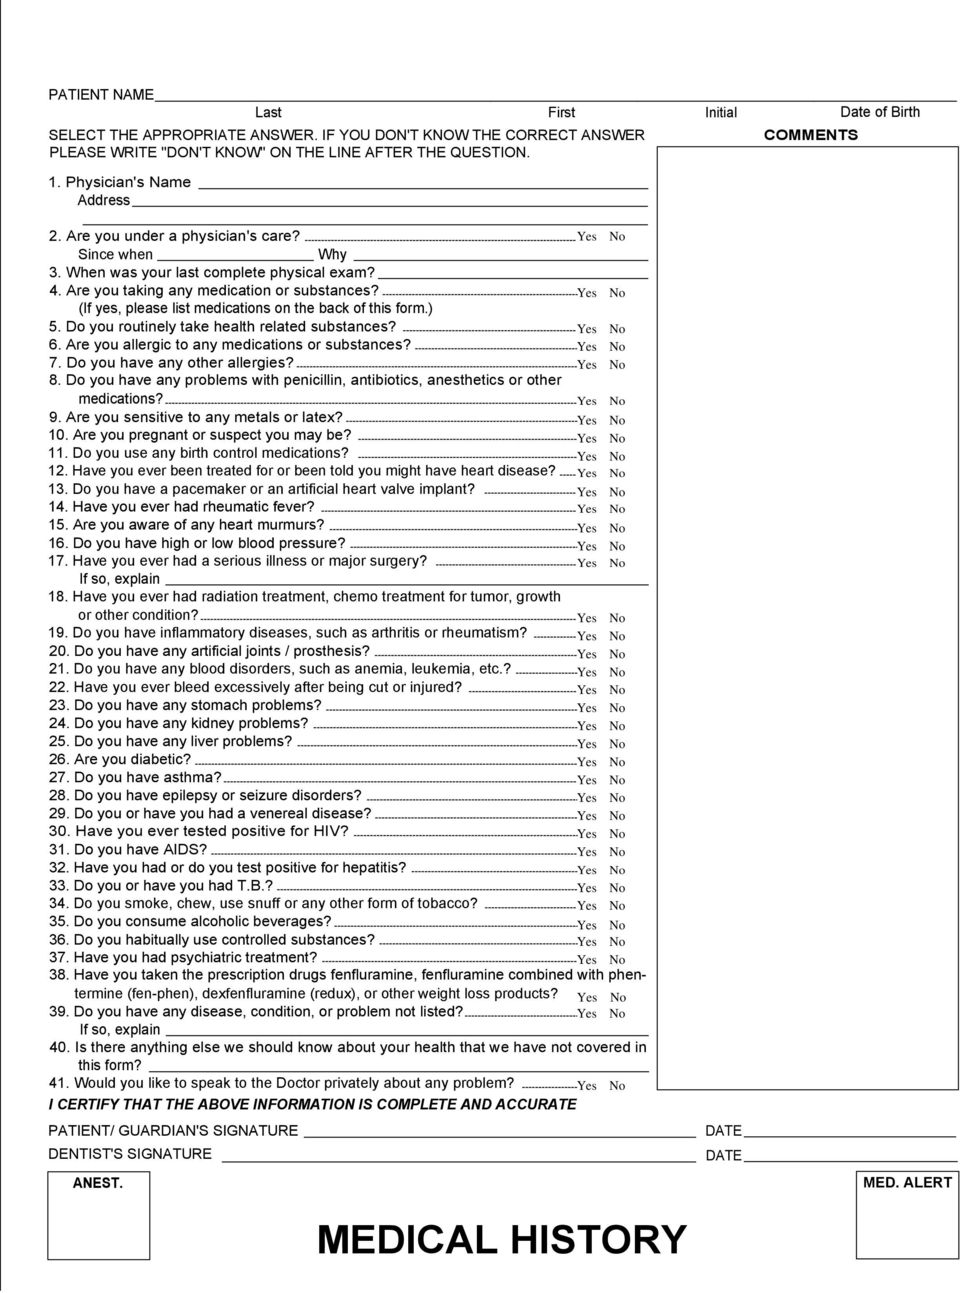 (If yes, please list medications on the back of this form.) 5. Do you routinely take health related substances? 6. Are you allergic to any medications or substances? 7.